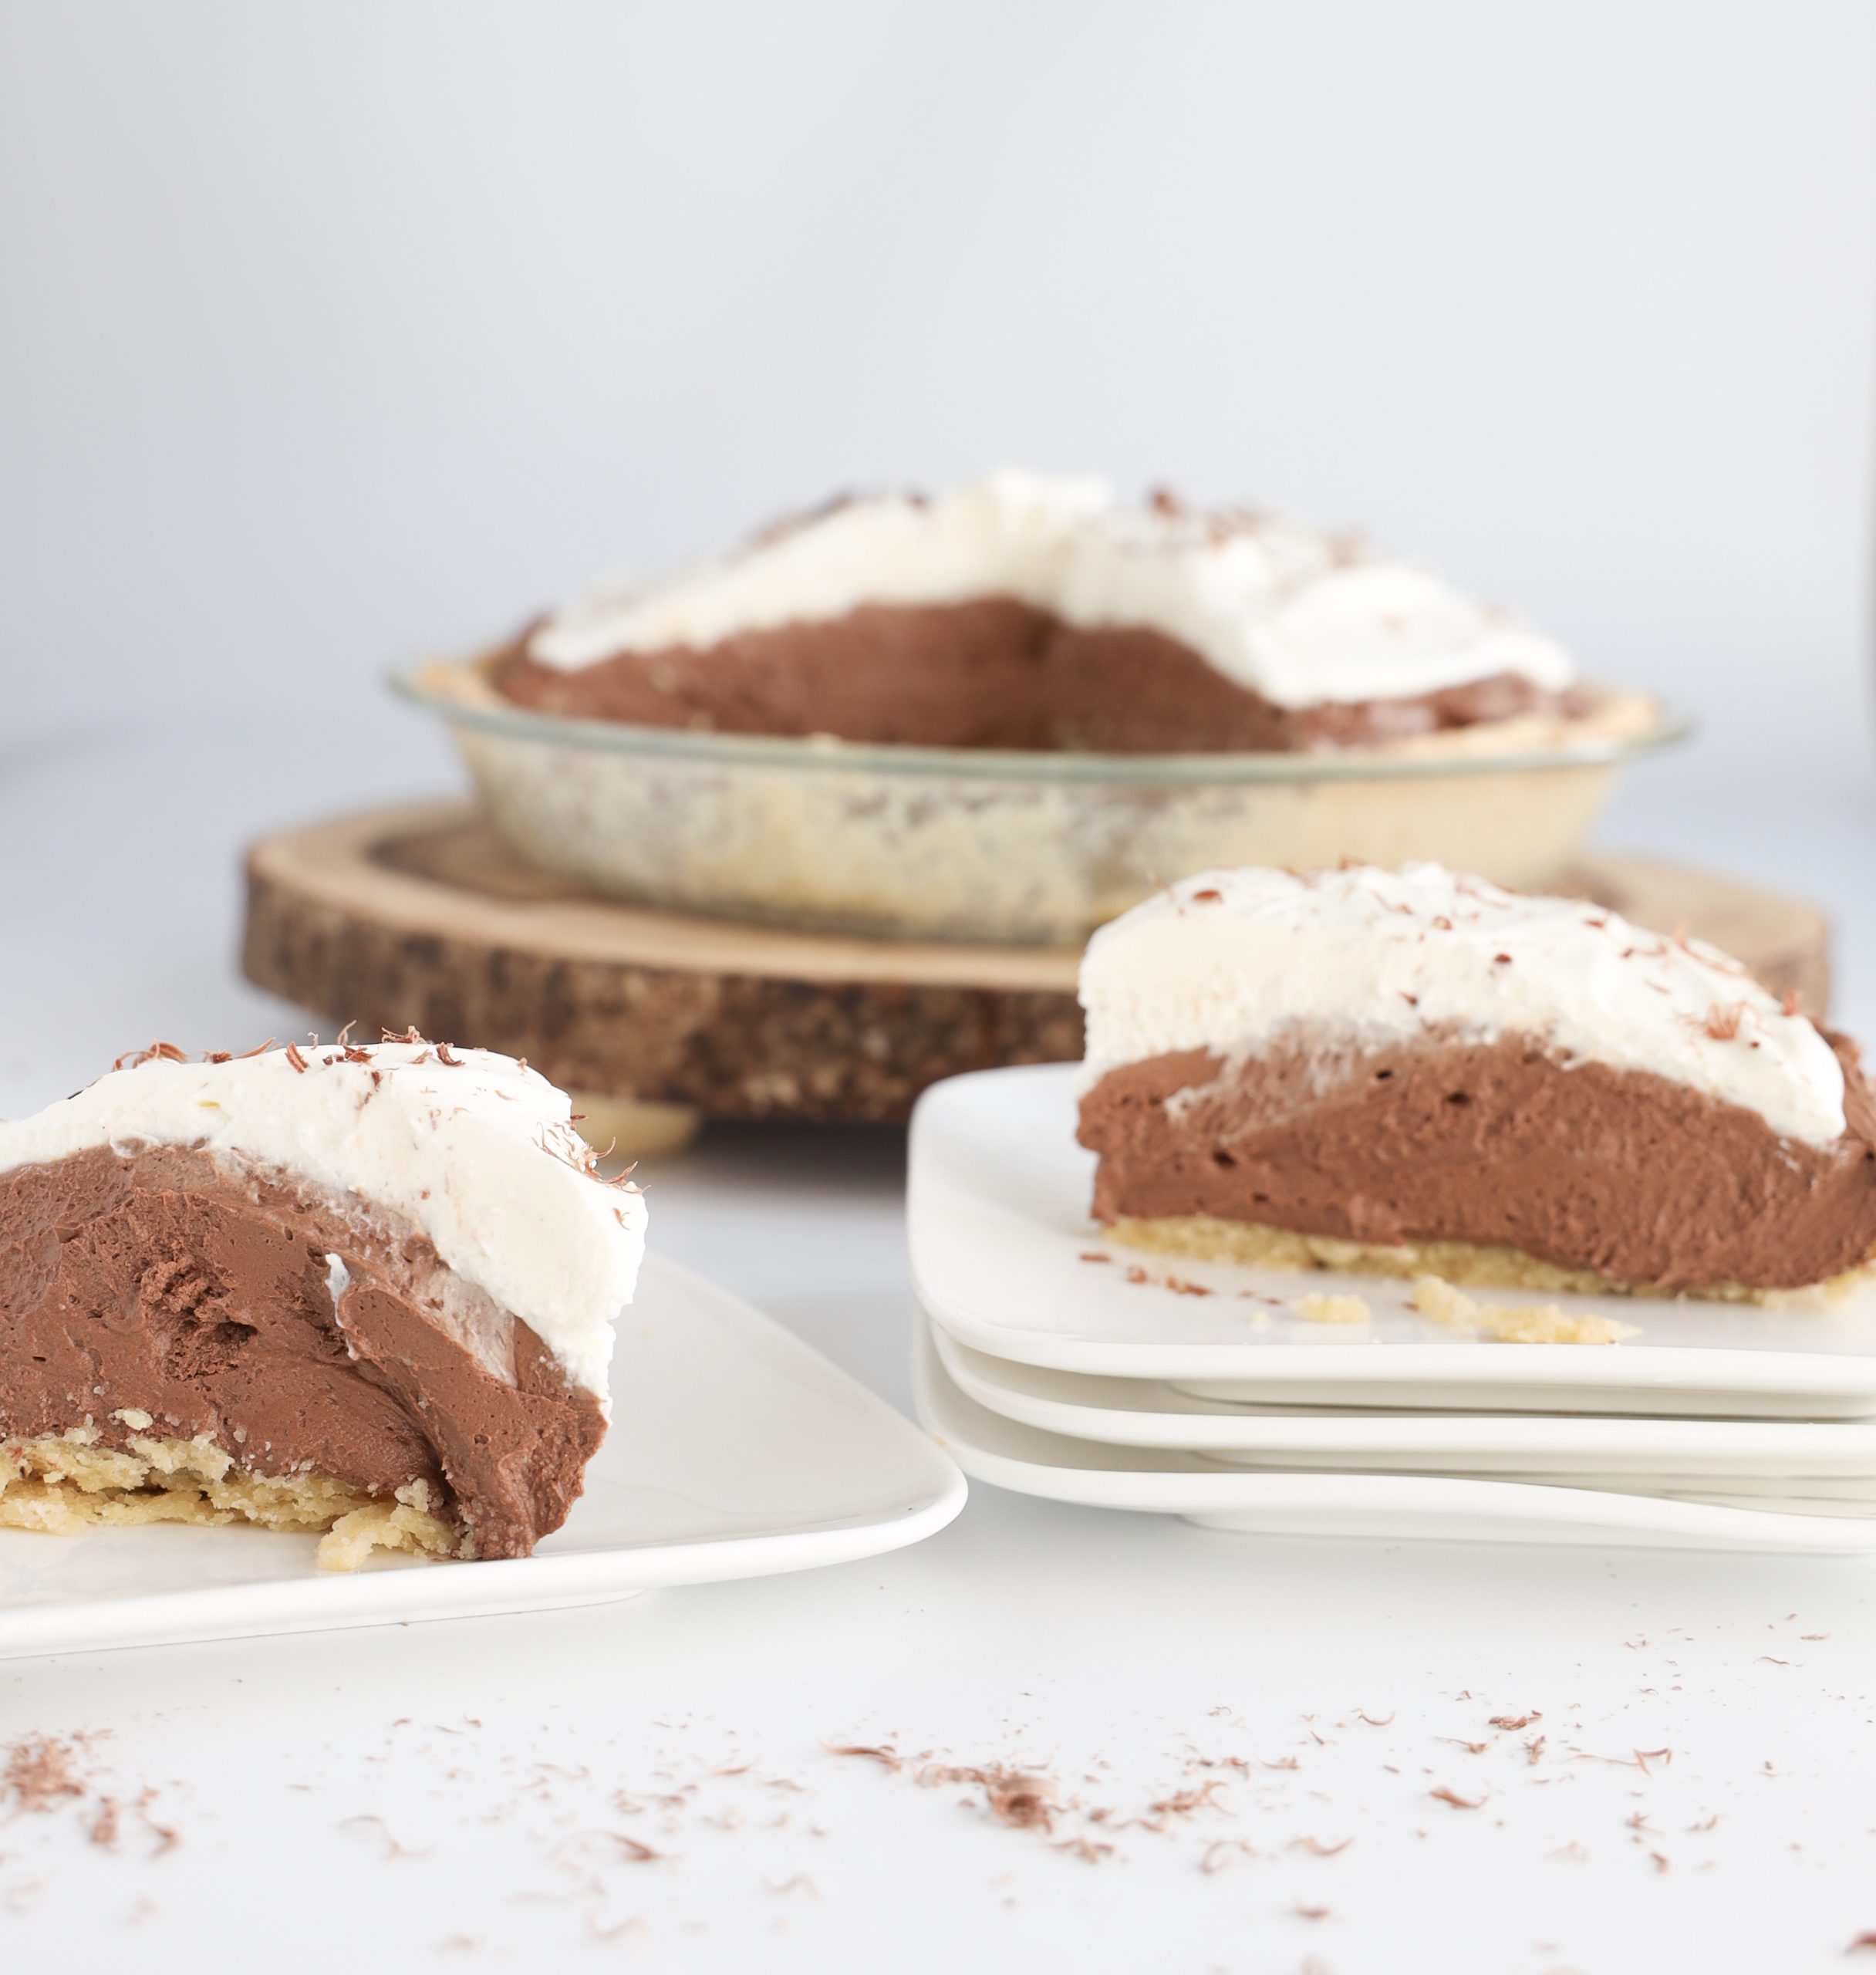 This keto and gluten-free chocolate pie filling is simply incredible.